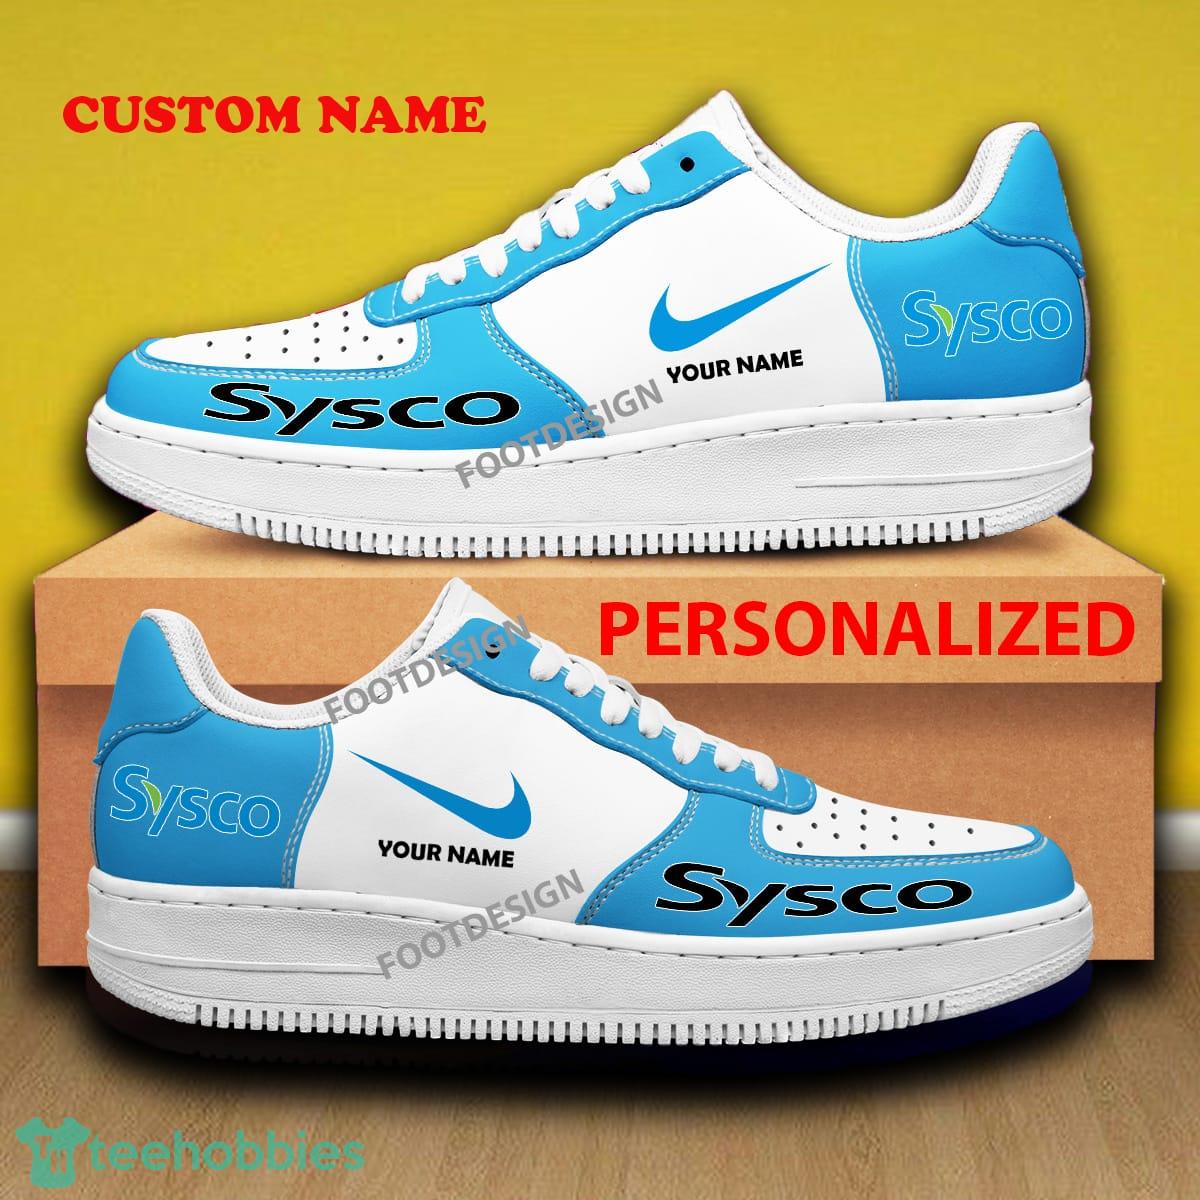 Custom Name Sysco Air Force 1 Sneakers Brand All Over Print Gift - Custom Name Sysco Air Force 1 Sneakers Brand All Over Print Gift